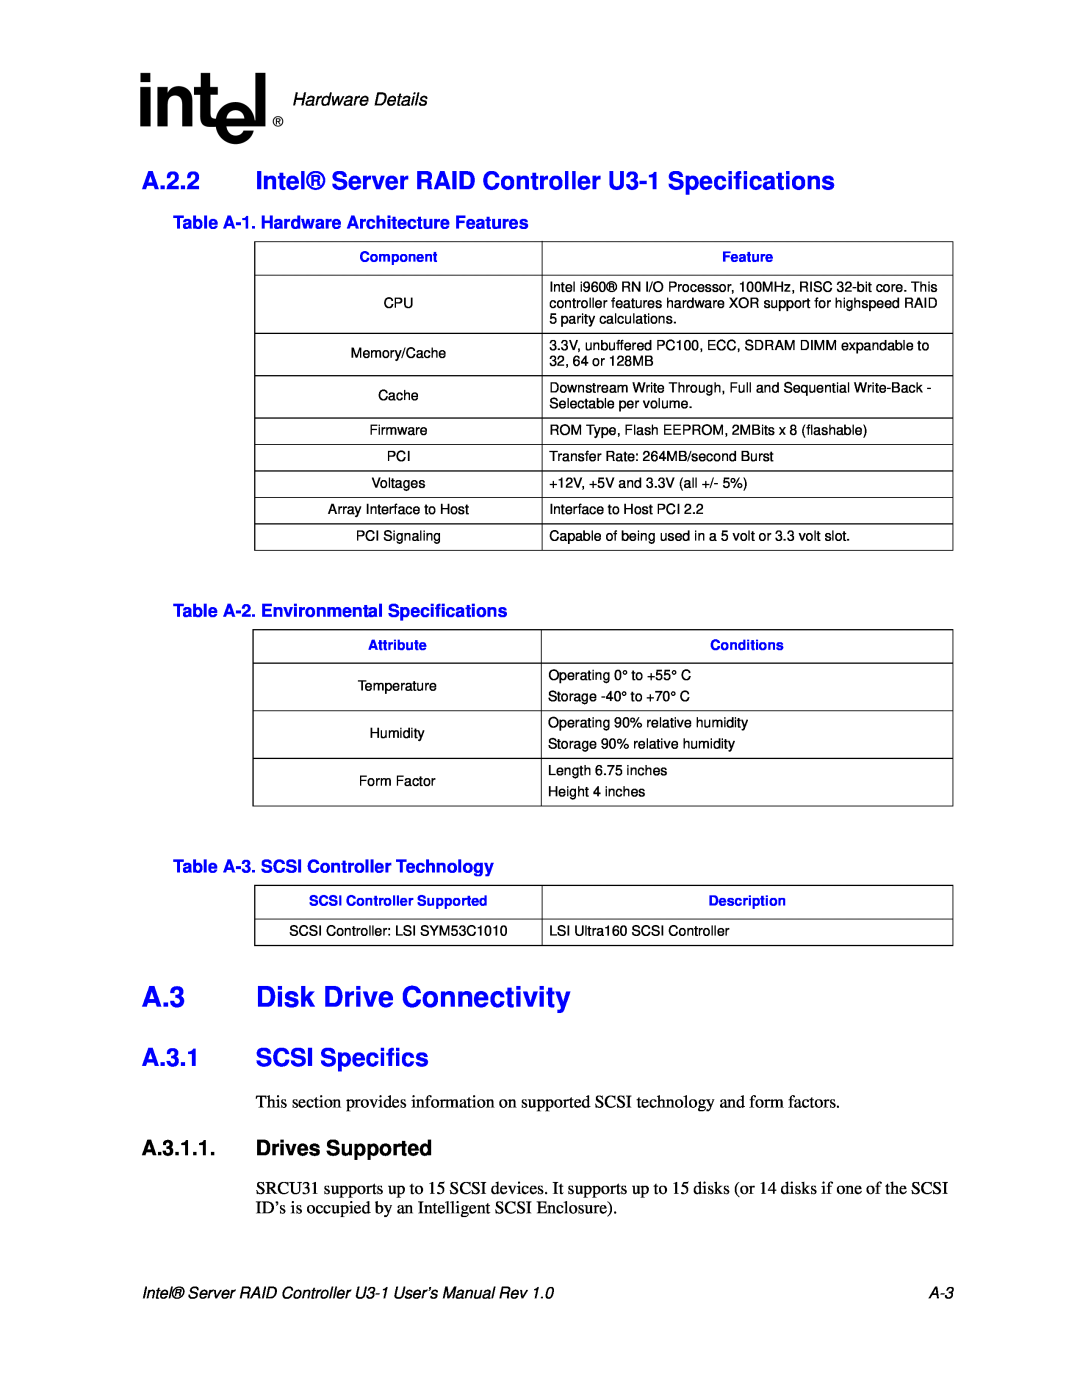 Intel SRCU31 Disk Drive Connectivity, A.3.1.1, Drives Supported, Hardware Details, Table A-2.Environmental Specifications 